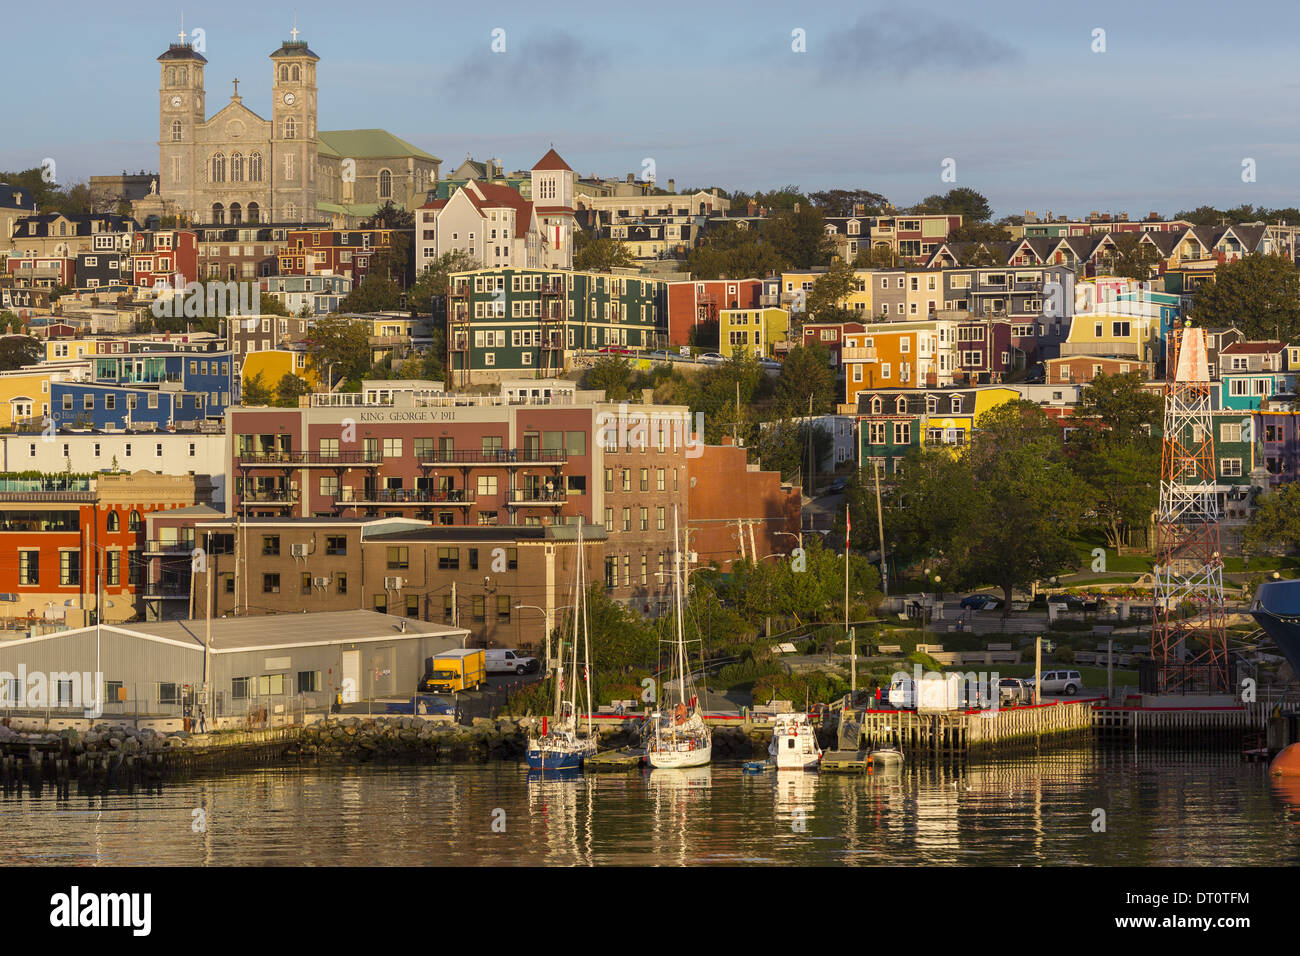 Anglican Cathedral of St. John the Baptist overlooks the coloured houses of downtown town of St John's, Newfoundland, Canada Stock Photo